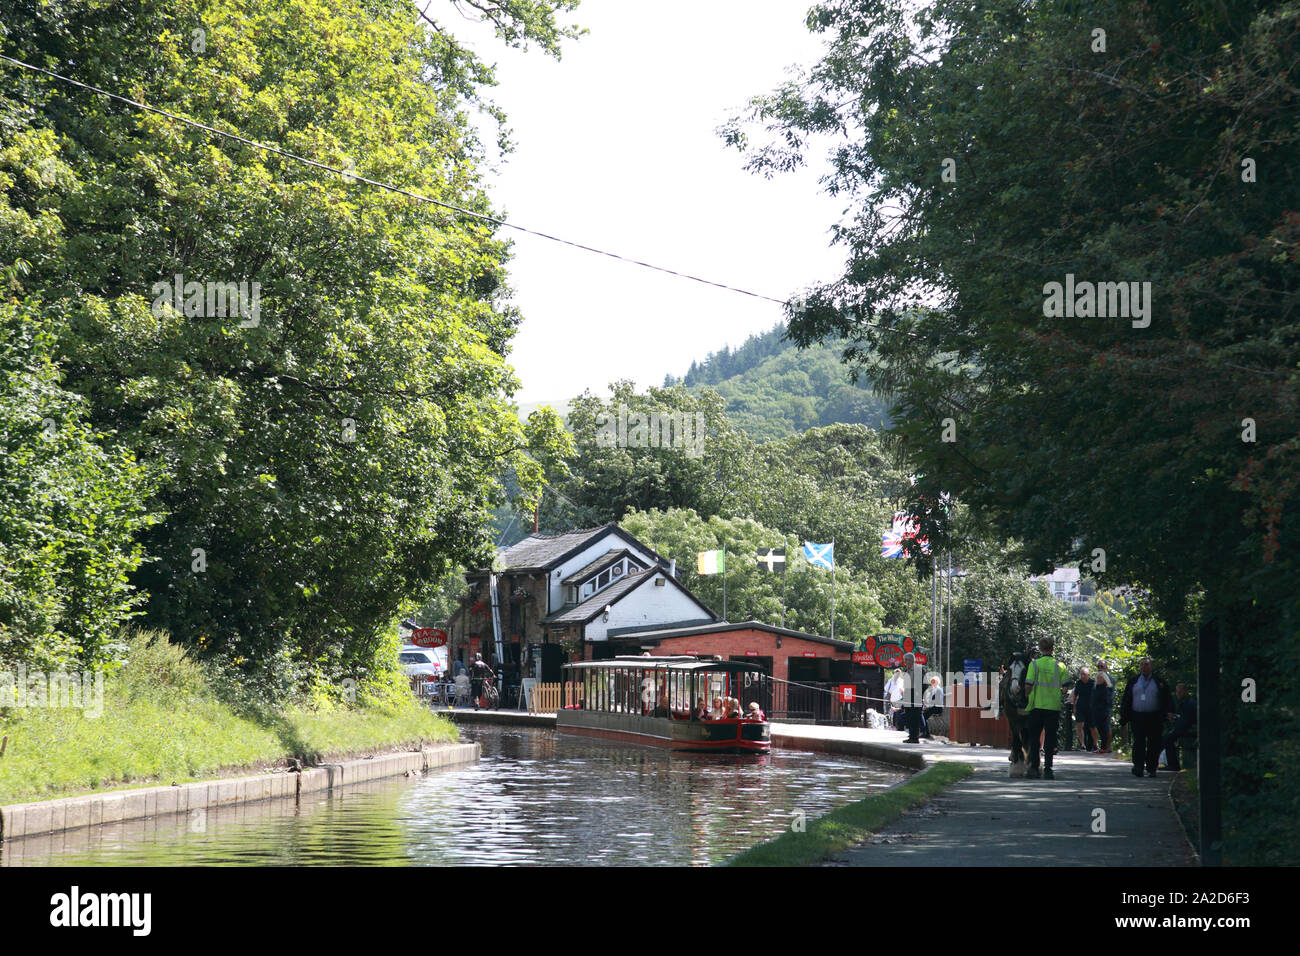 The wharf at Llangollen on the Llangollen Canal, from where horses draw boats up the Dee valley towards Llantysilio Stock Photo